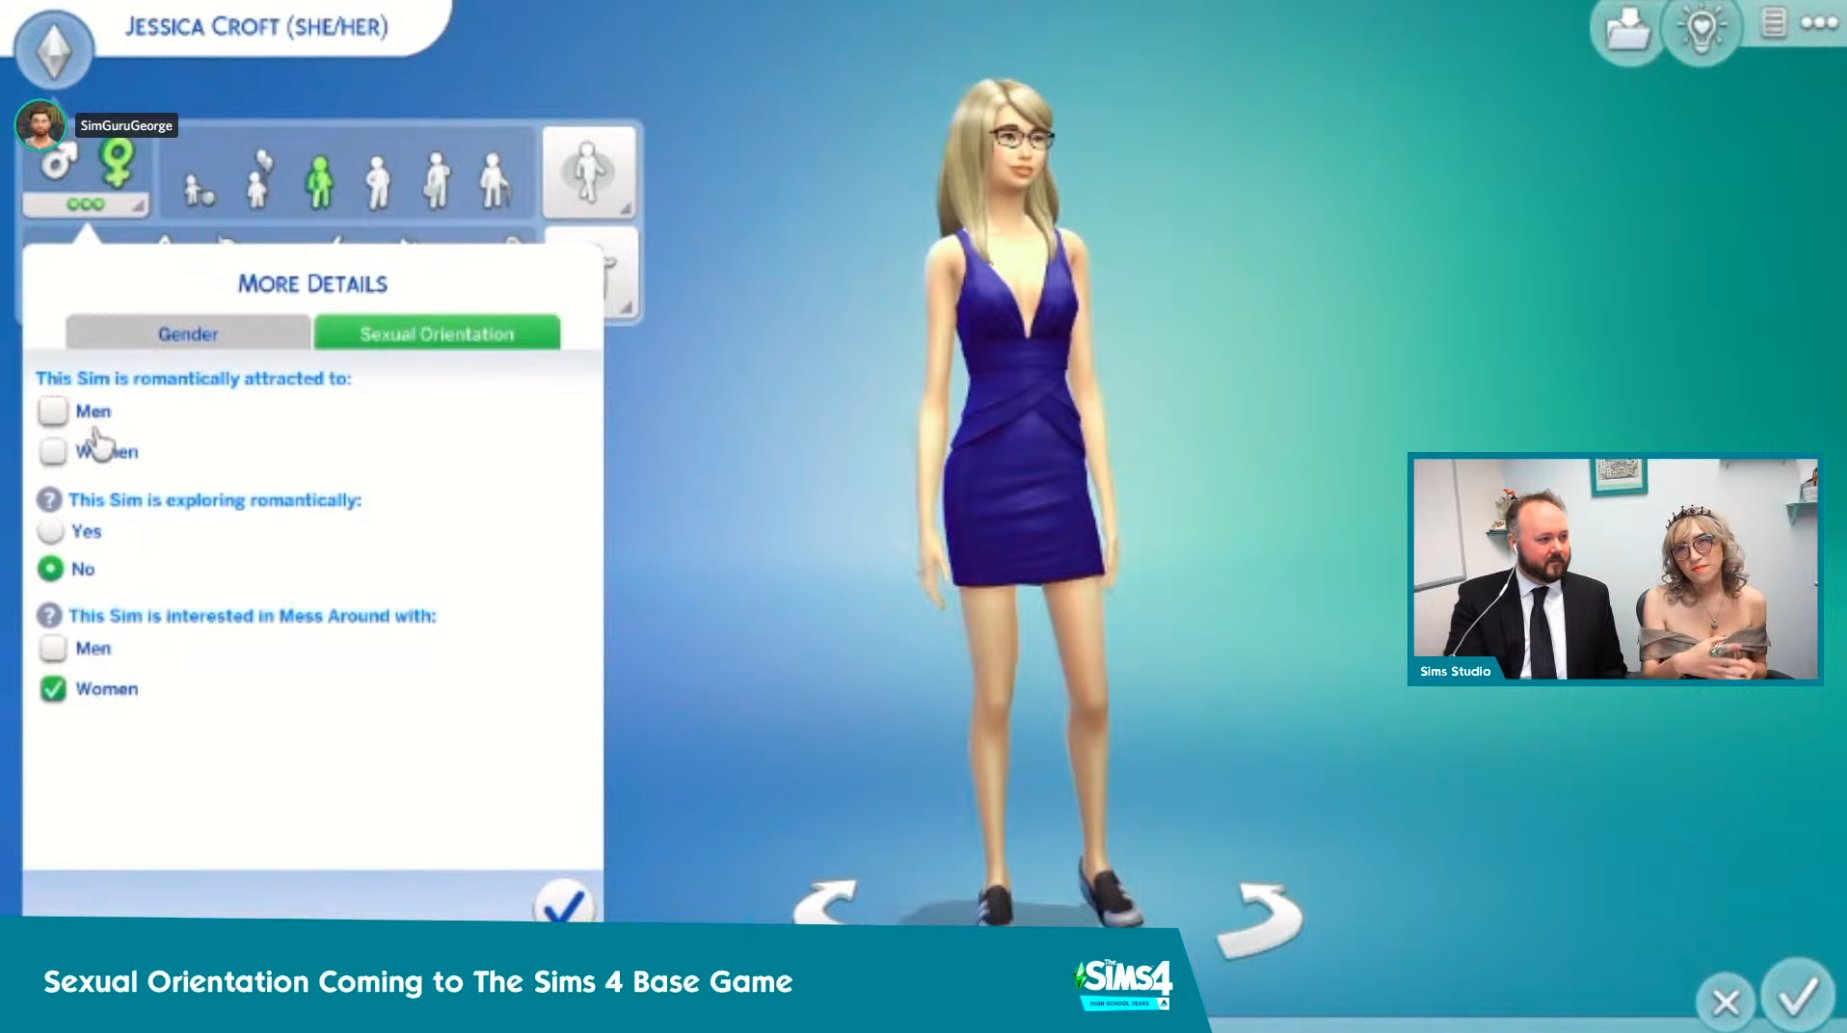 The Sims 4 Patch Version 1.90 (High School Years) will Add Sexual Orientation - The Sim Architect